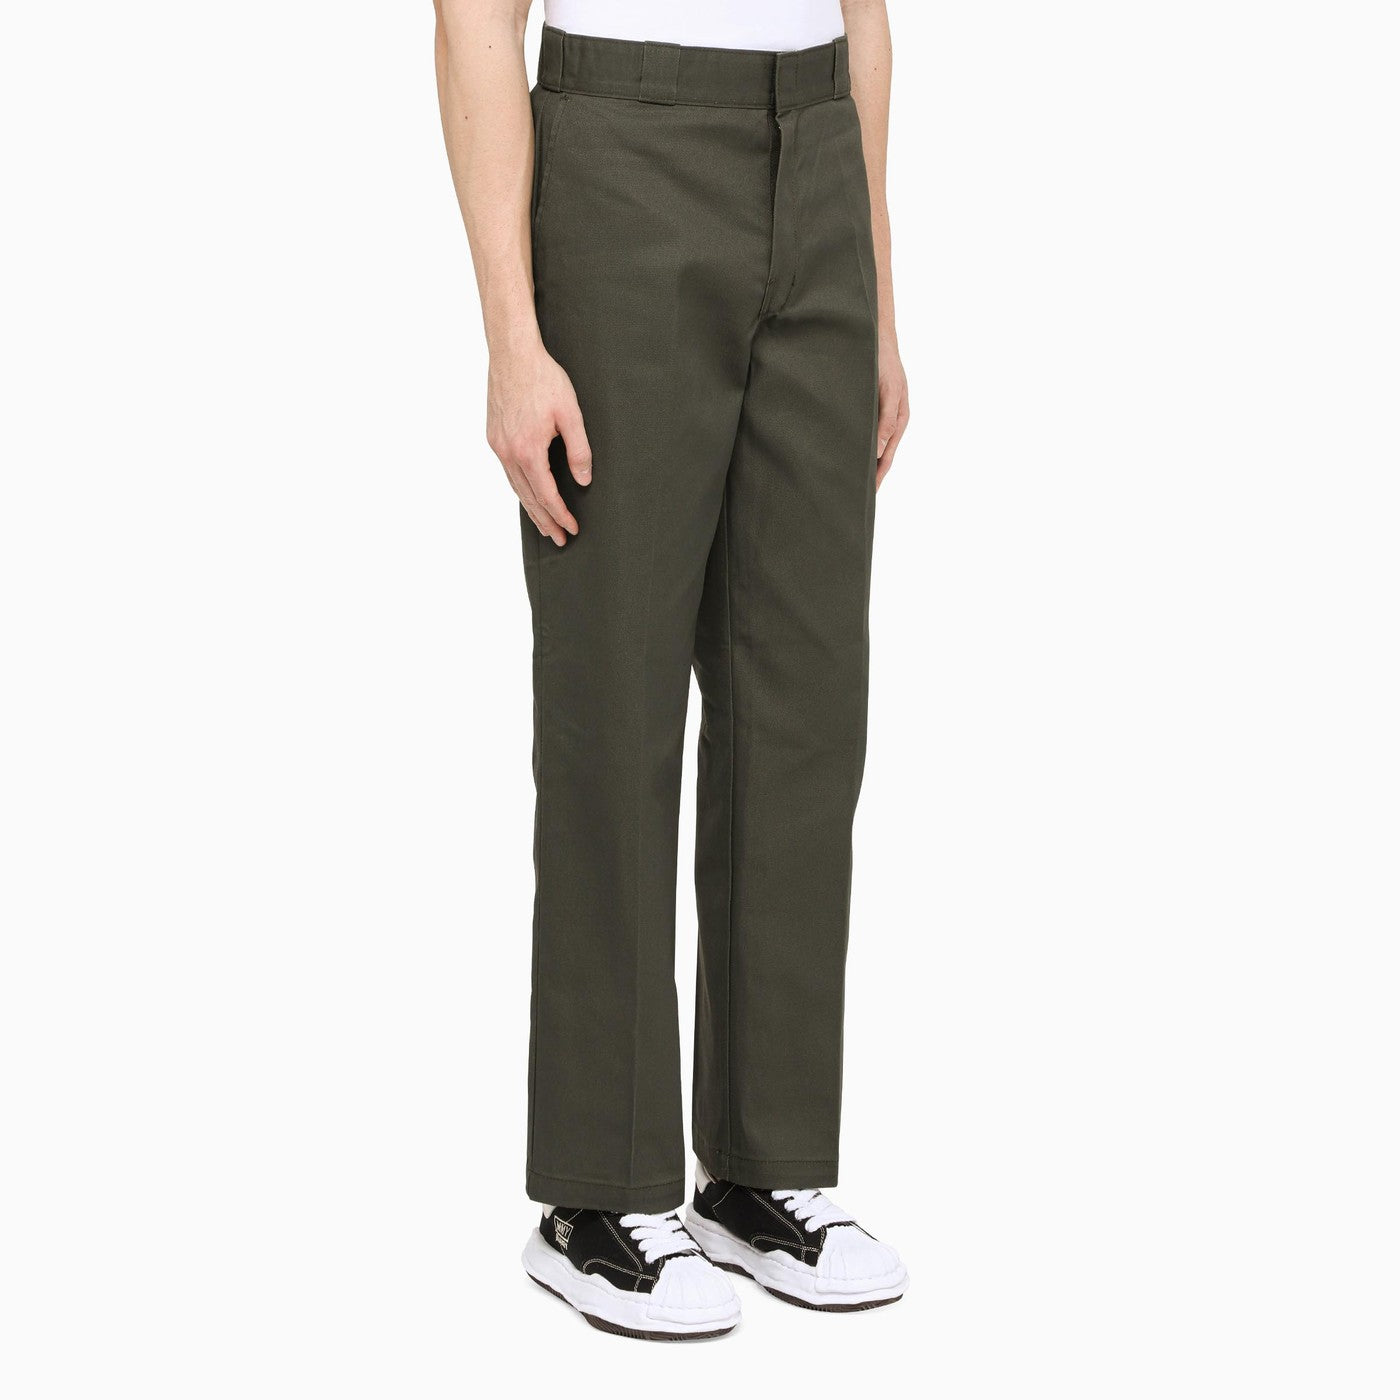 Dickies 874 Olive Green Straight Leg Trousers